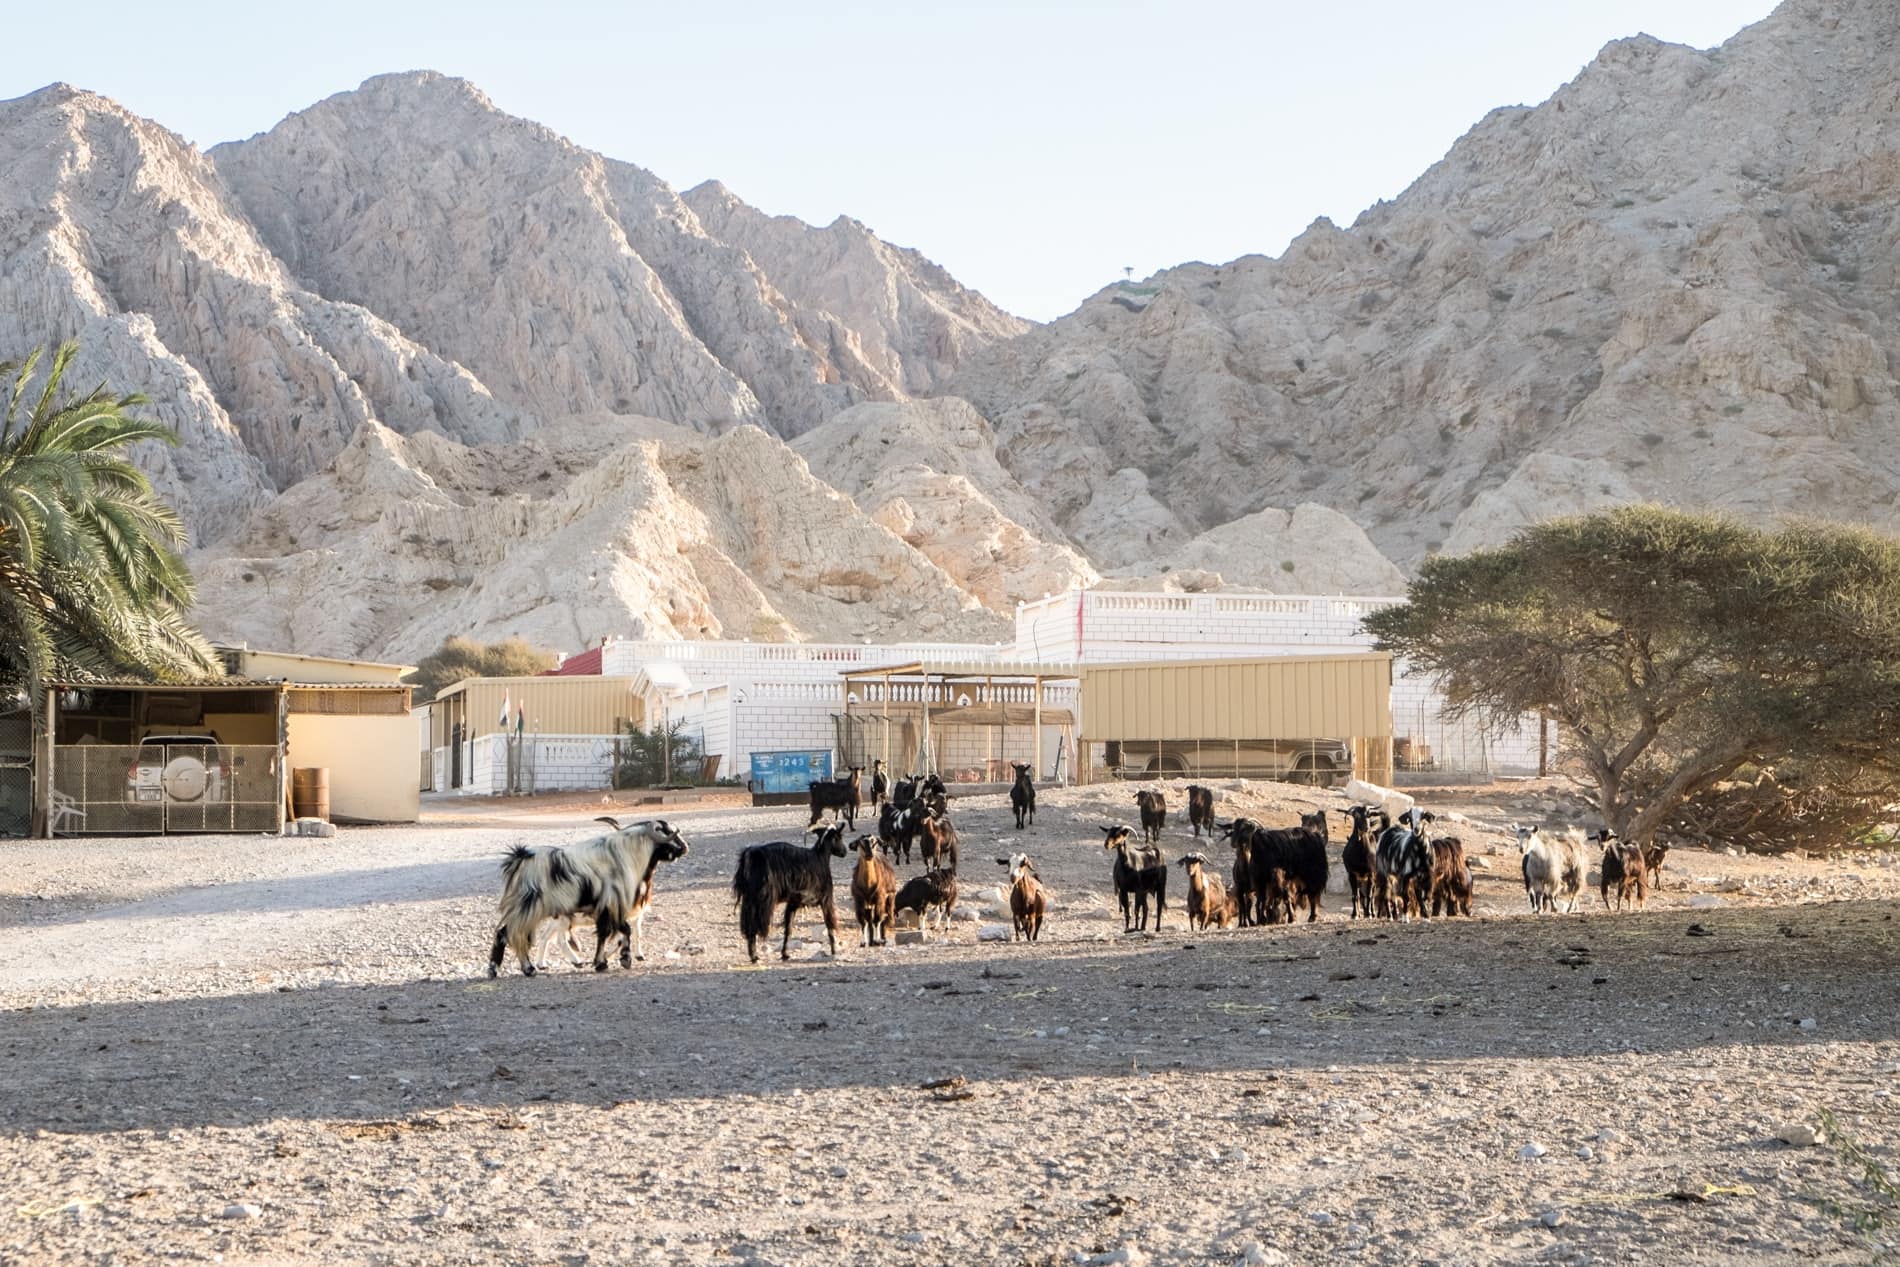 Goats outside low rise buildings in the Jebel Jais mountain village of Shamal. 